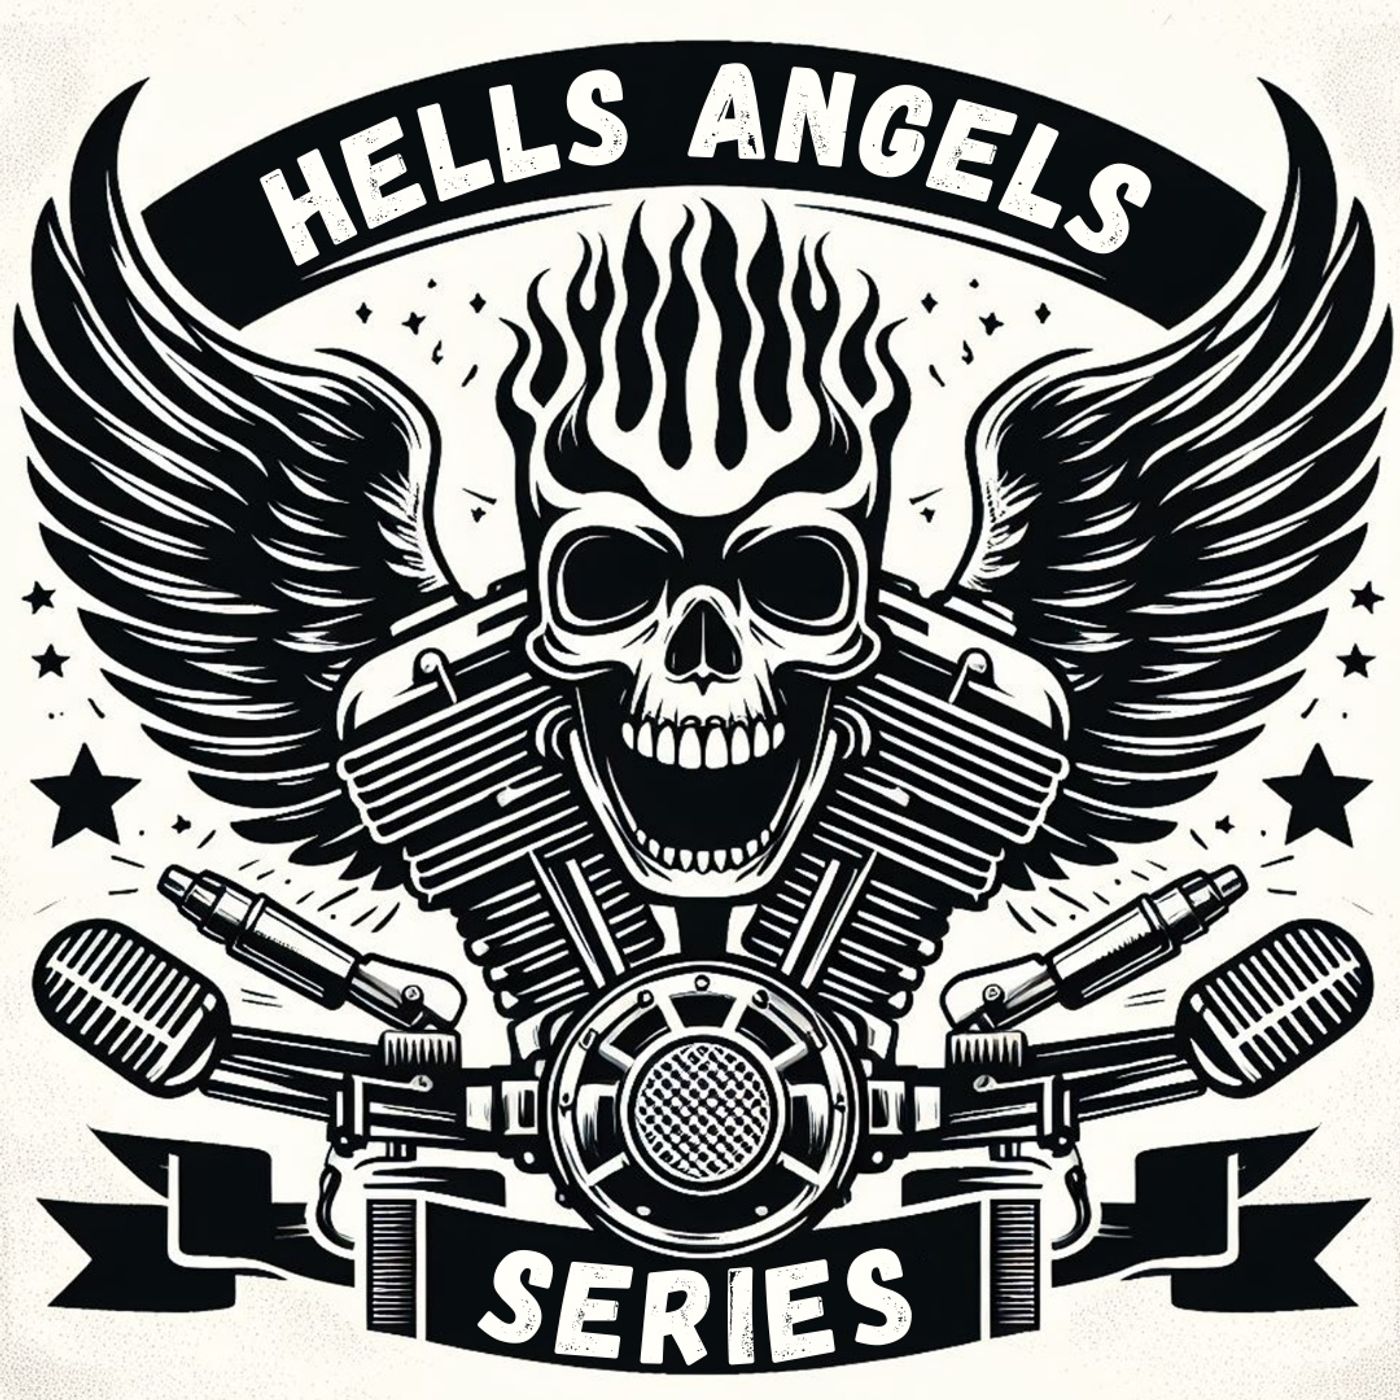 Hells Angels | History Of The Hells Angels